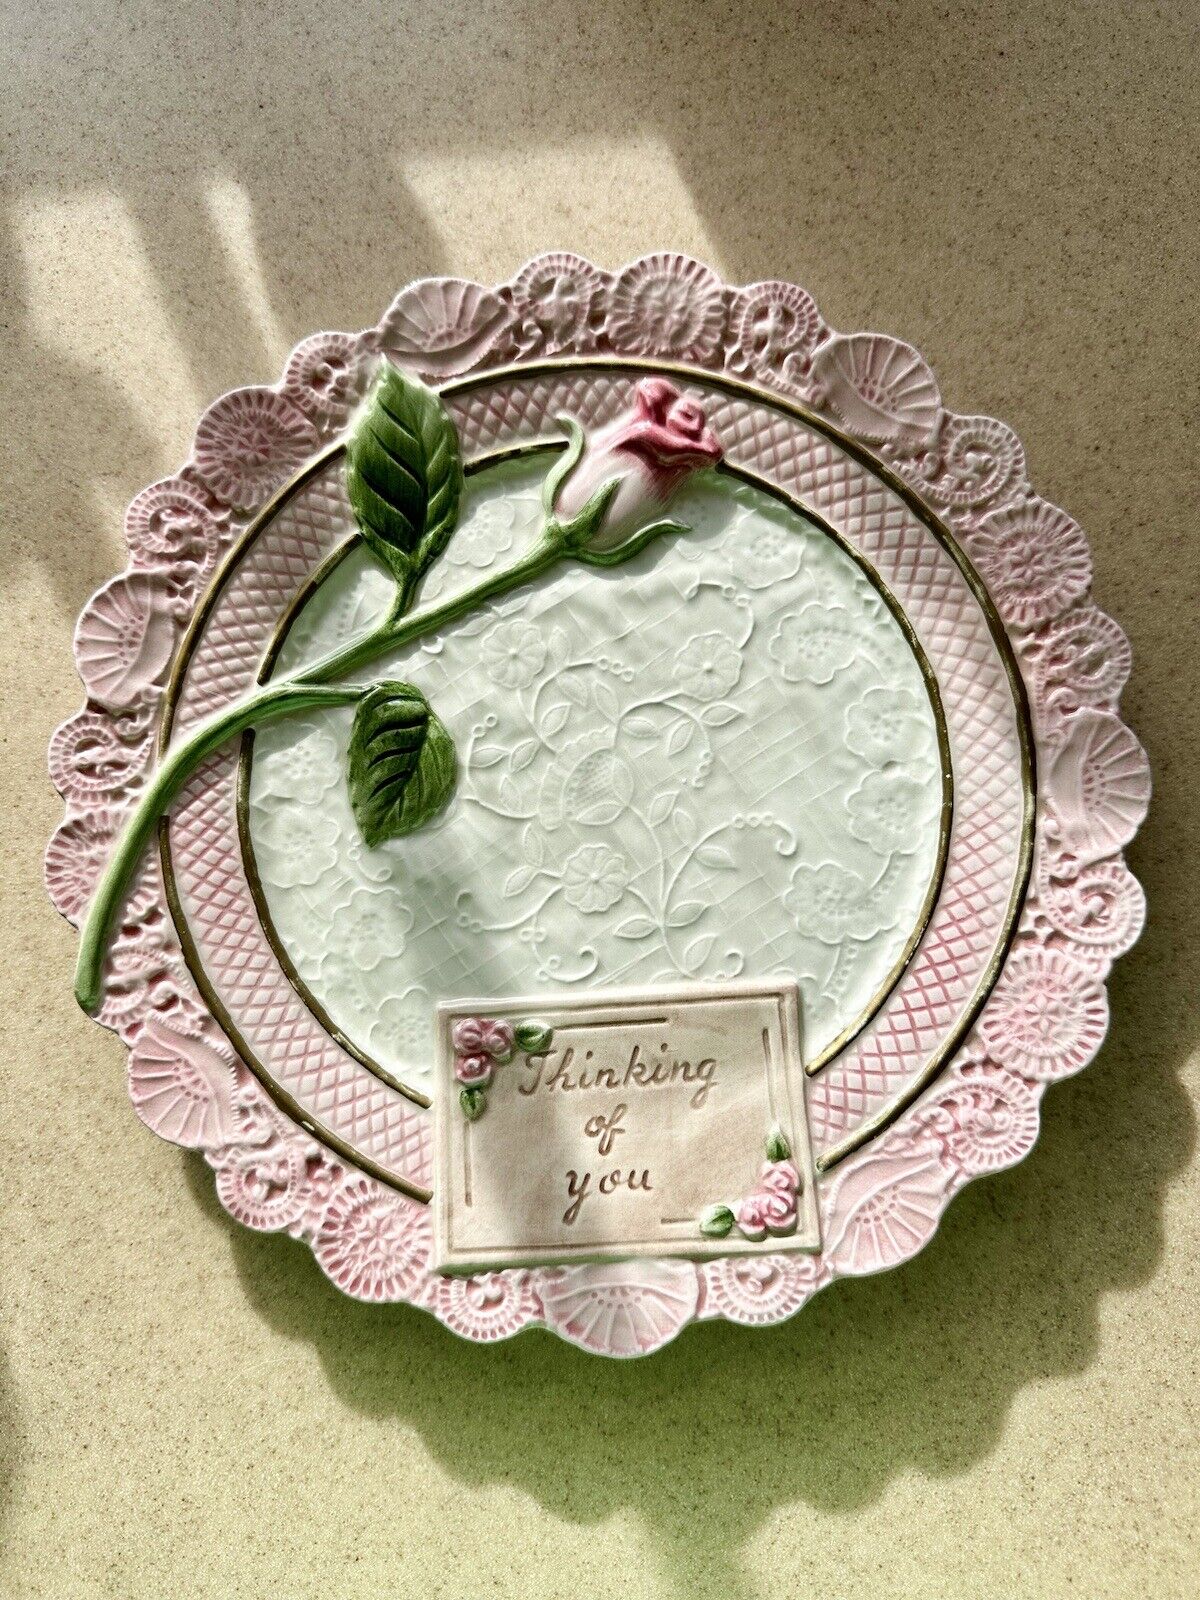 Omnibus Fitz & Floyd Omnibus Hand Painted 1994 Rose Plate “Thinking of You”